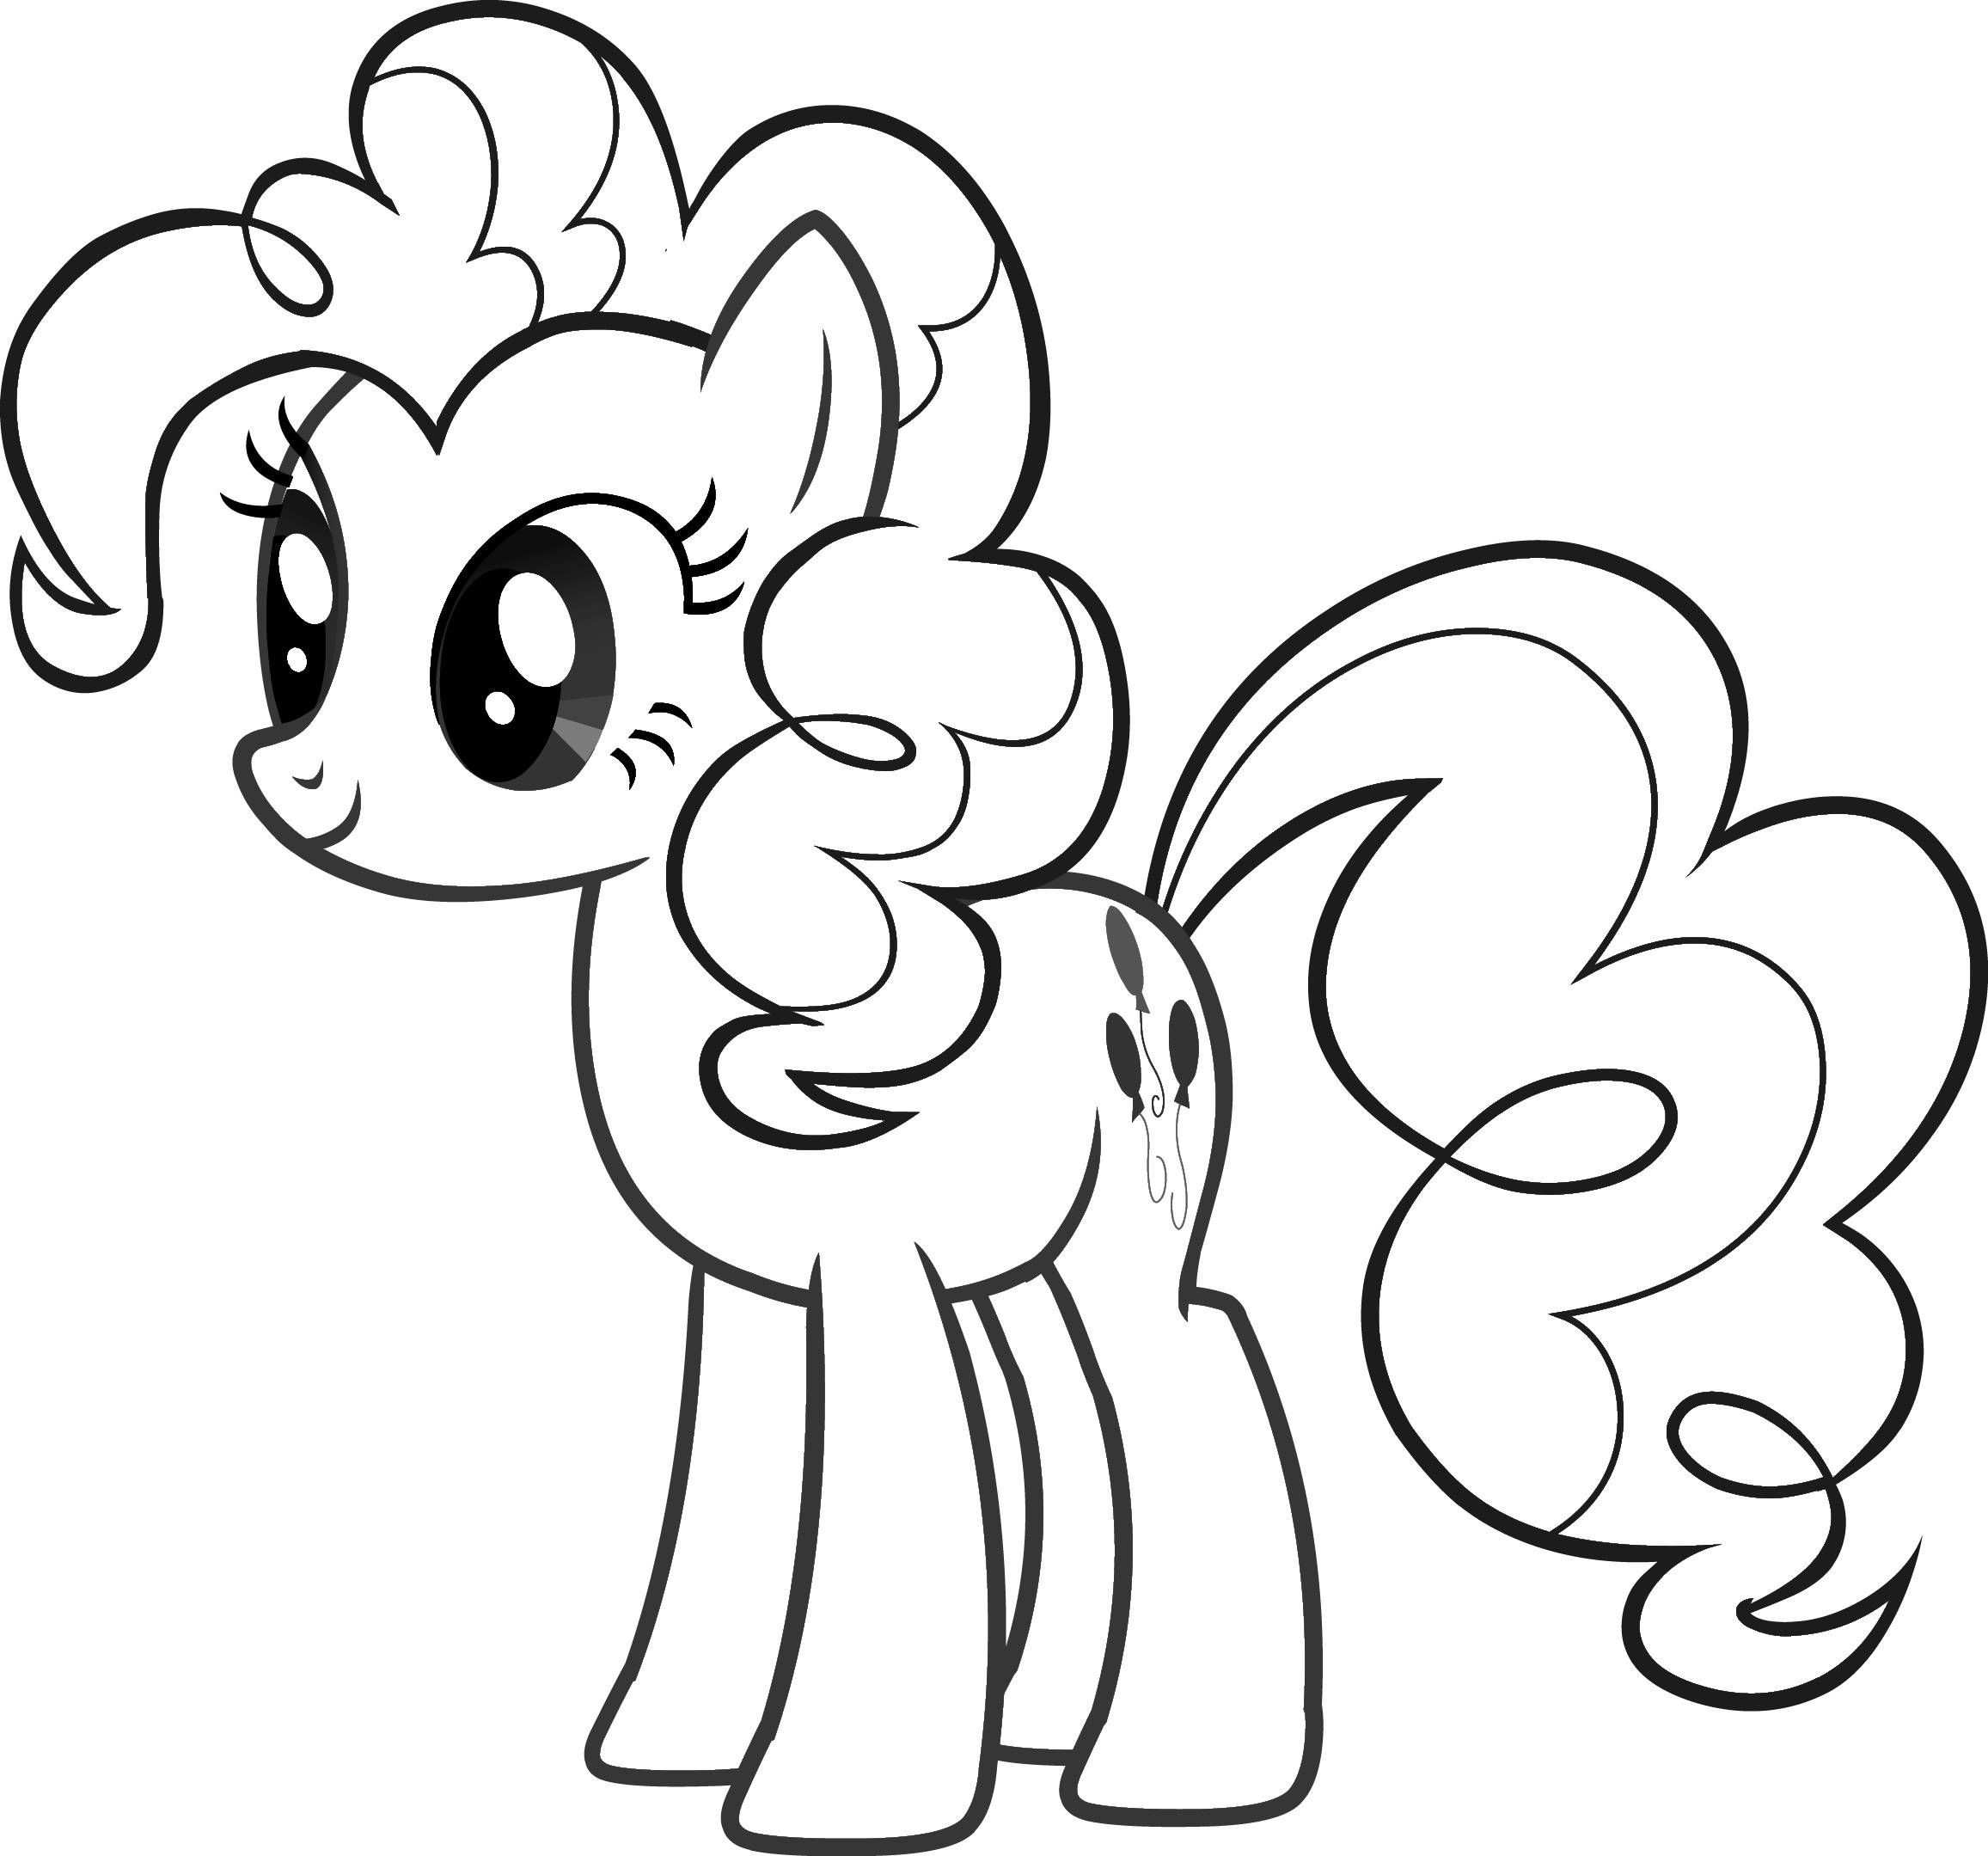 Free Printable My Little Pony Coloring Pages For Kids Unicorn Coloring Pages My Littl